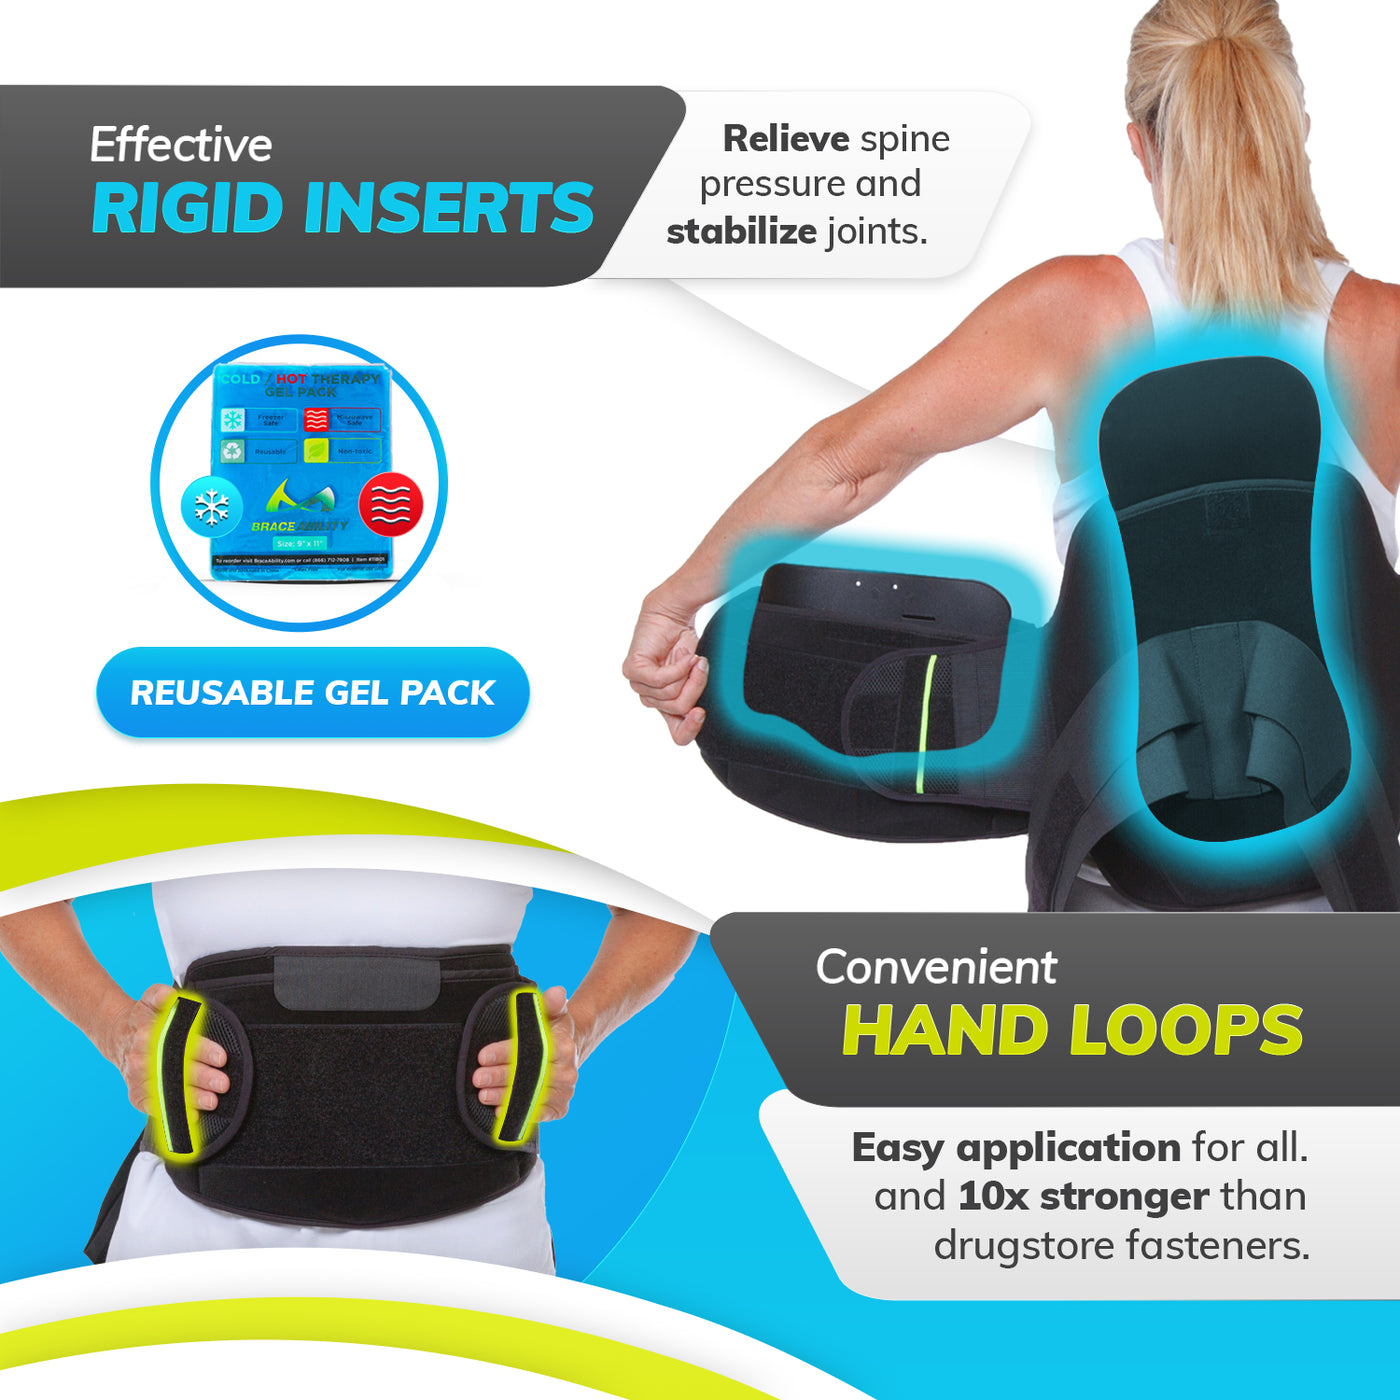 Our rigid back brace has stable plastic inserts and can hold a hot and cold gel pack